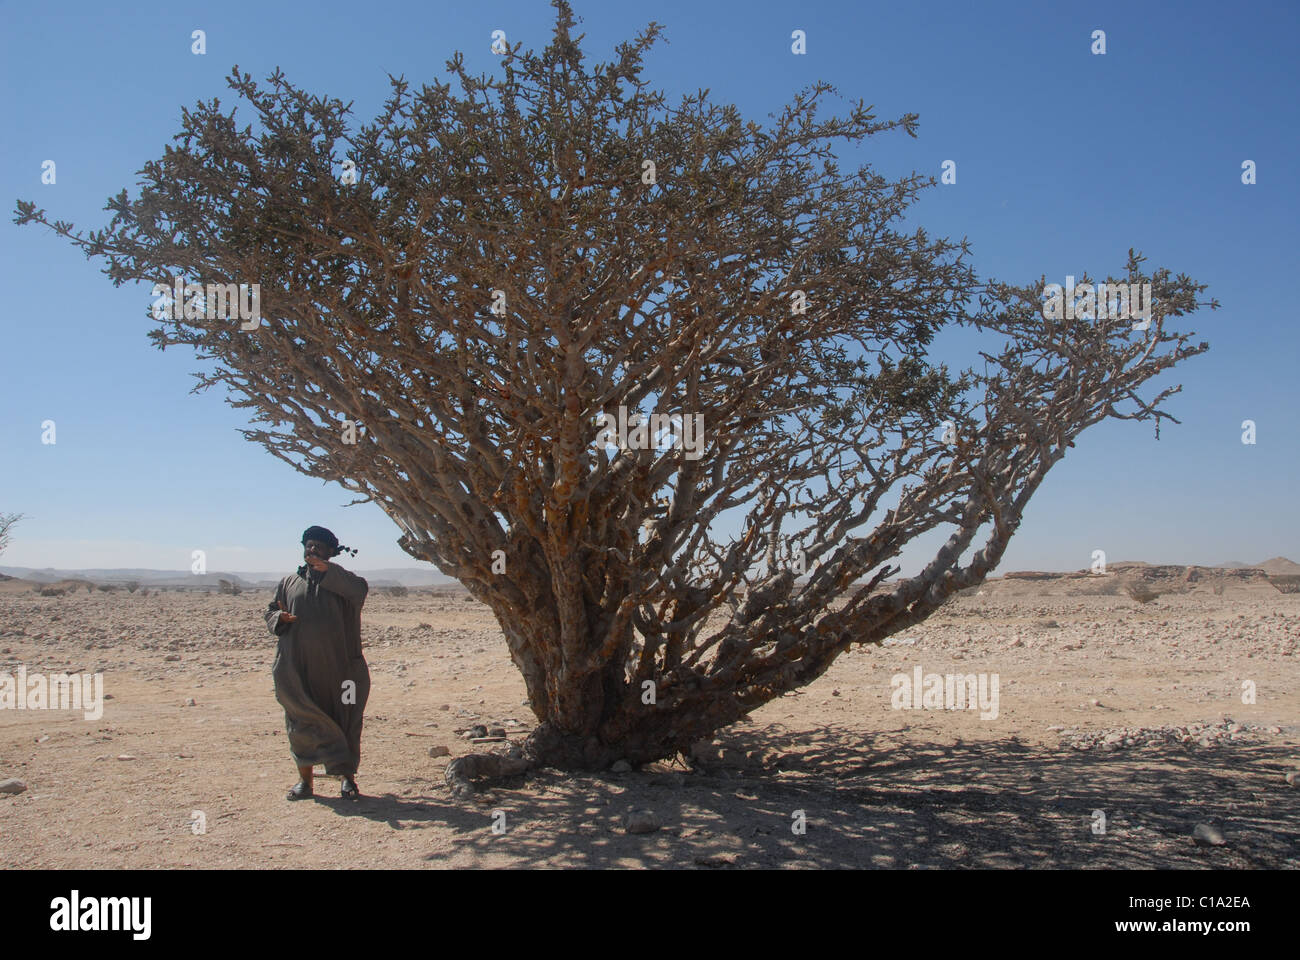 Omani guide stands by Frankincense Tree in Wadi Dawkah, southern Oman